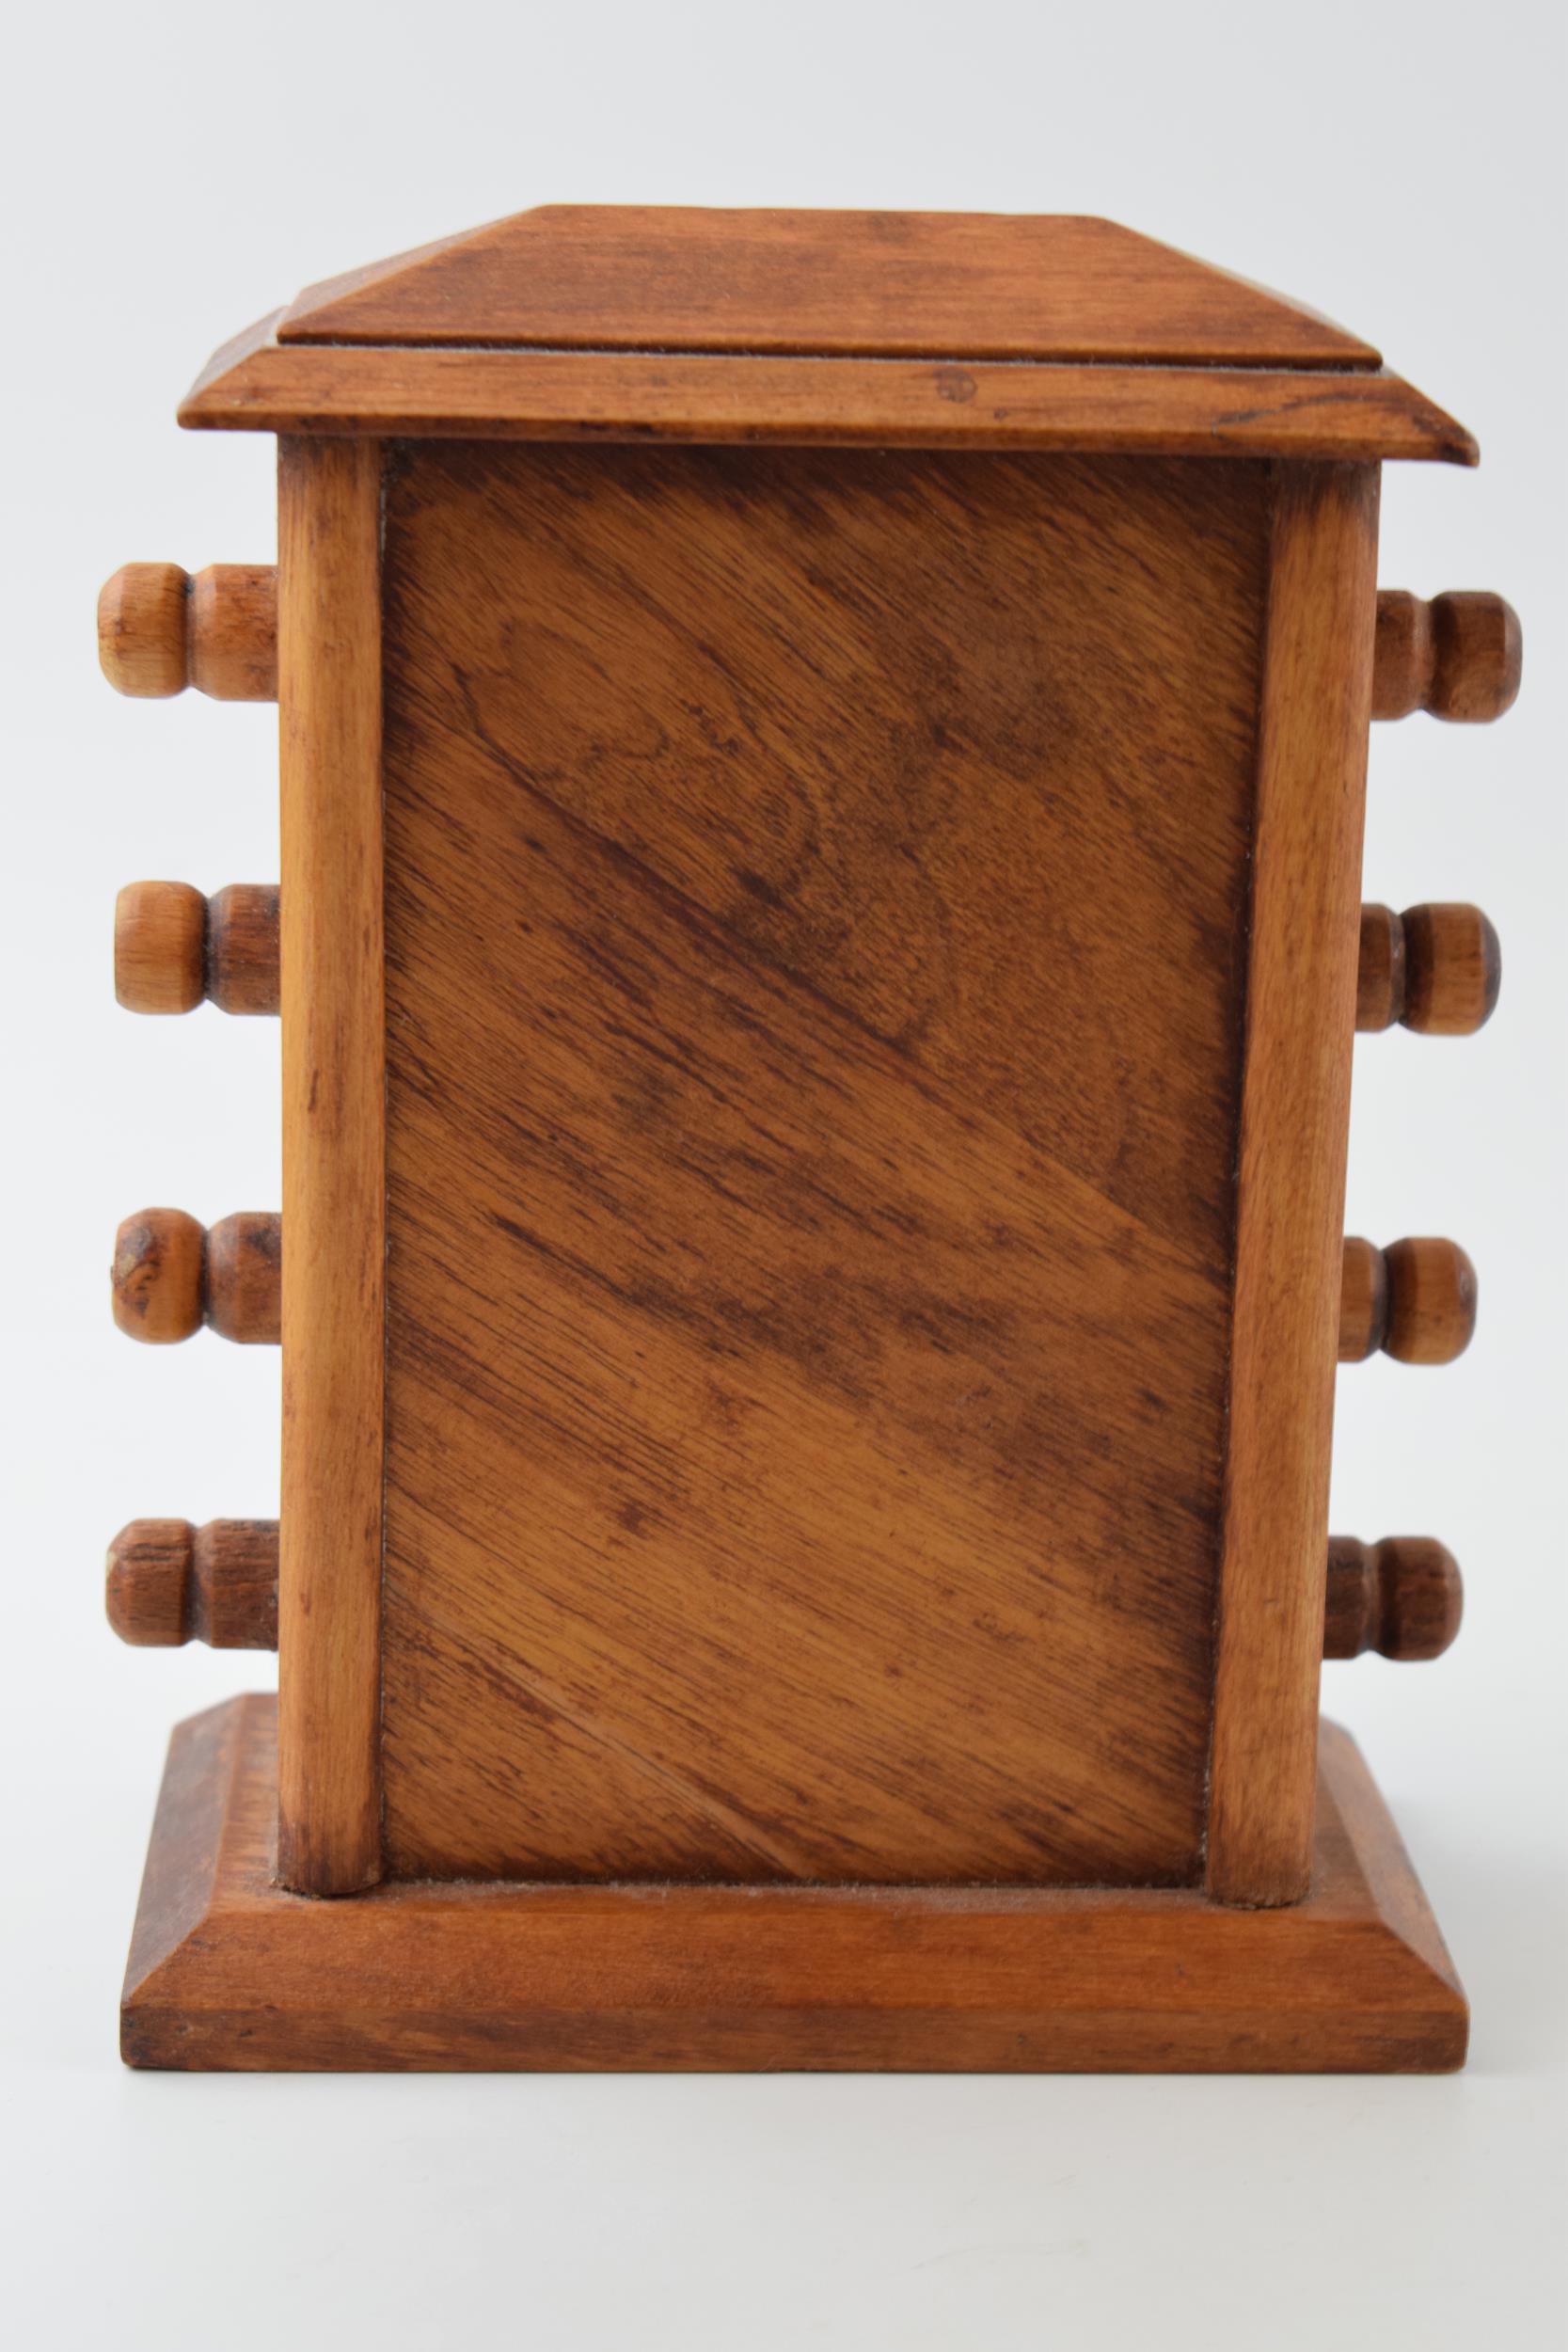 Vintage style perpetual calendar in wooden case with scroll like action, 17cm tall. - Image 3 of 4